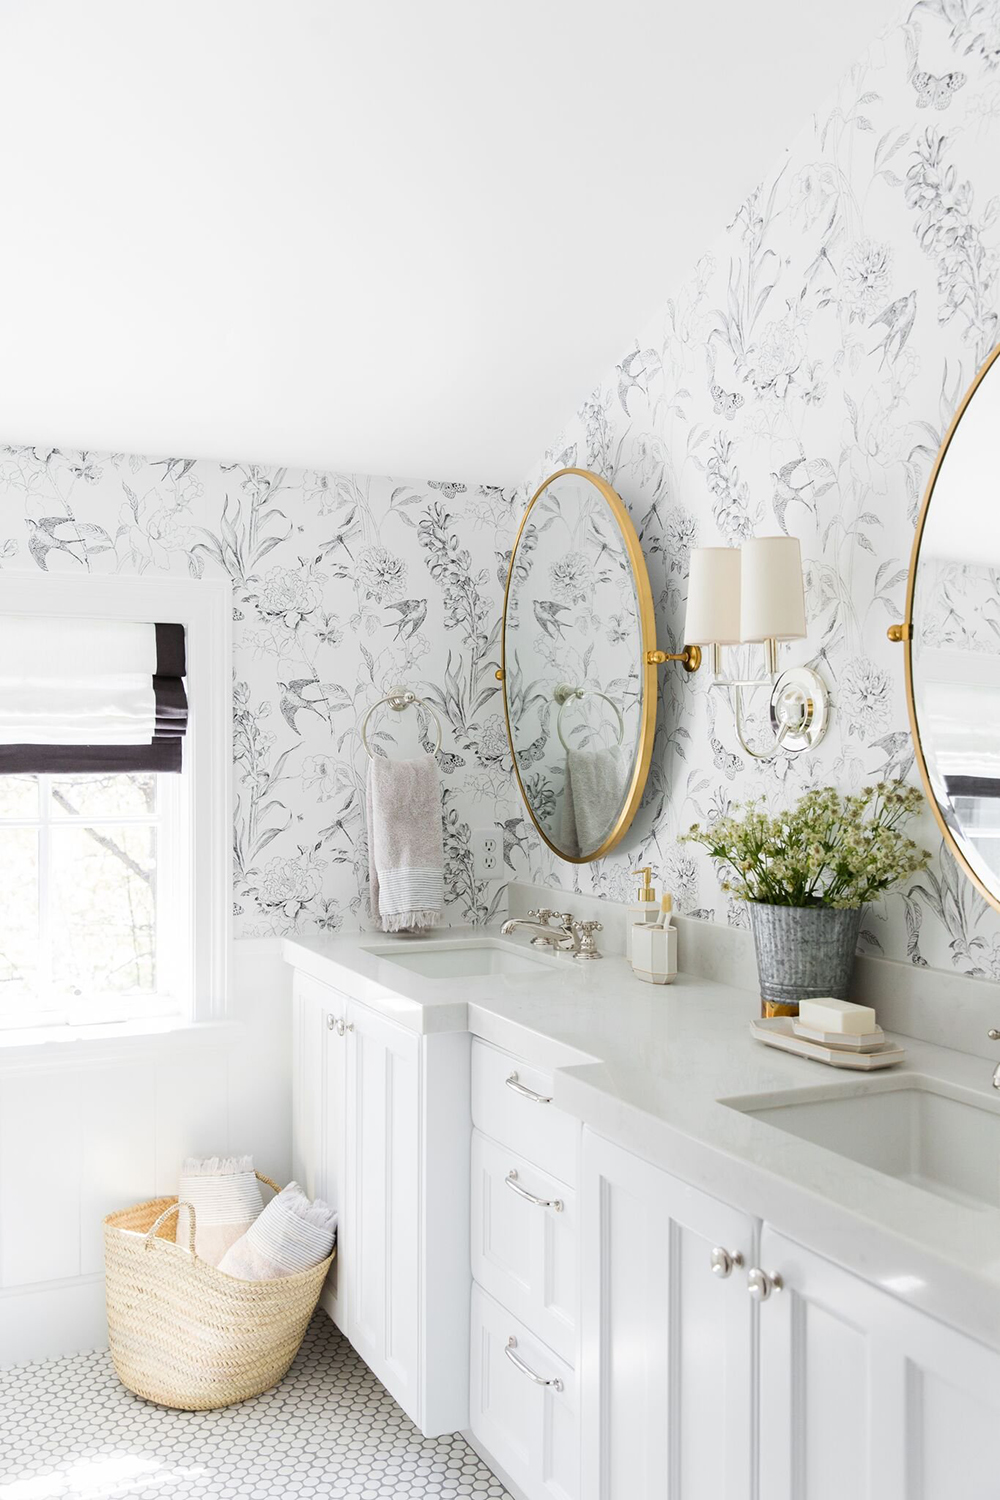 Organic Wallpaper For A Powder Room Tuesday